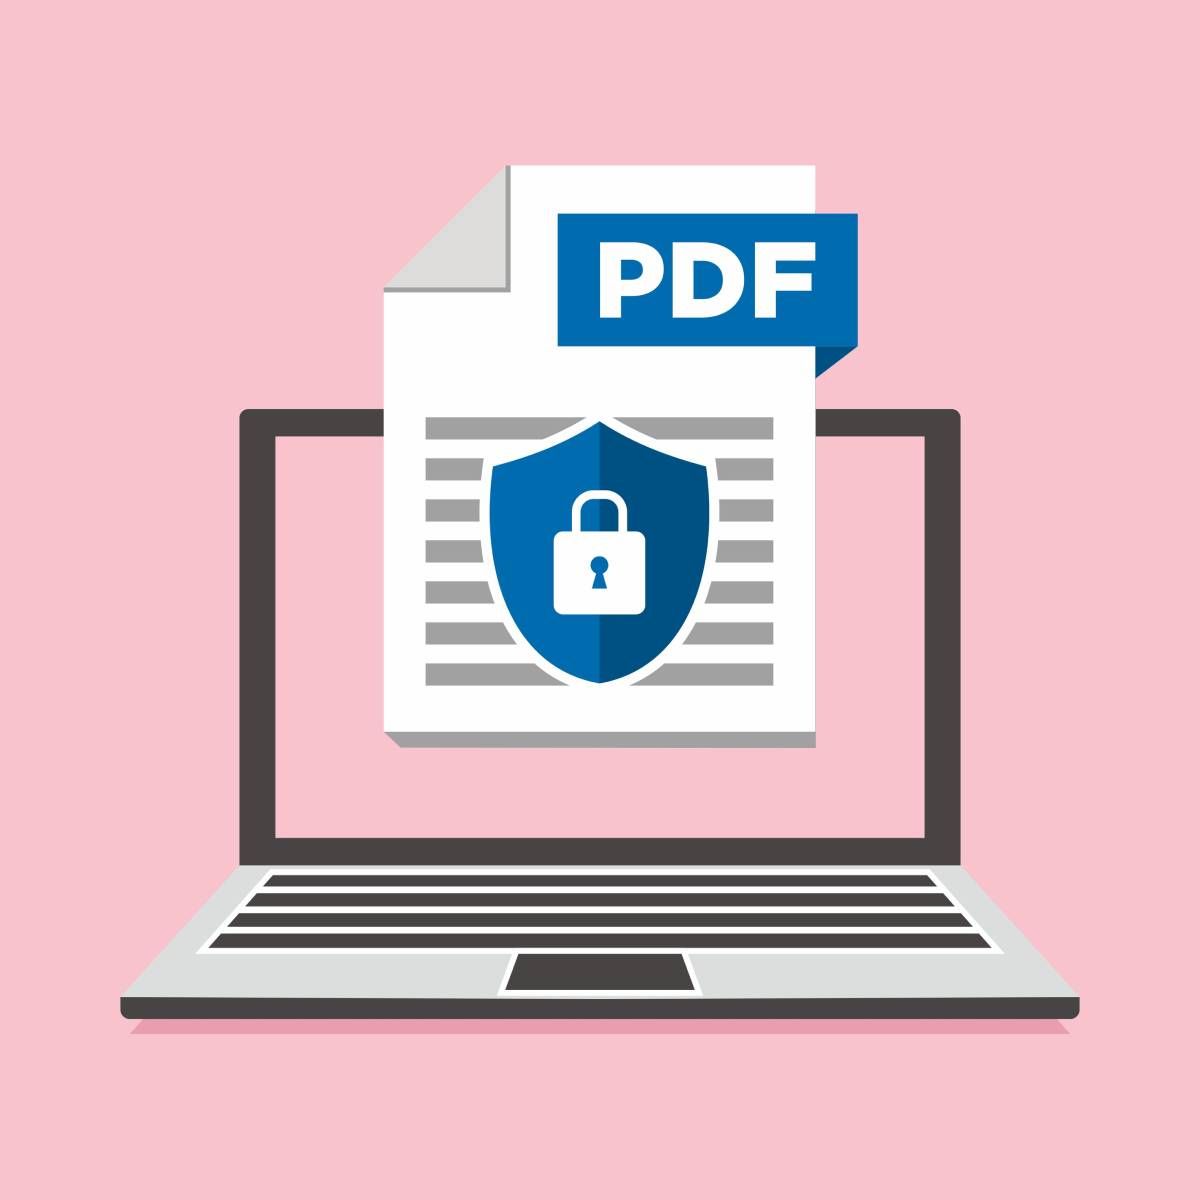 Graphic of a laptop with a pop-up of a locked PDF document.